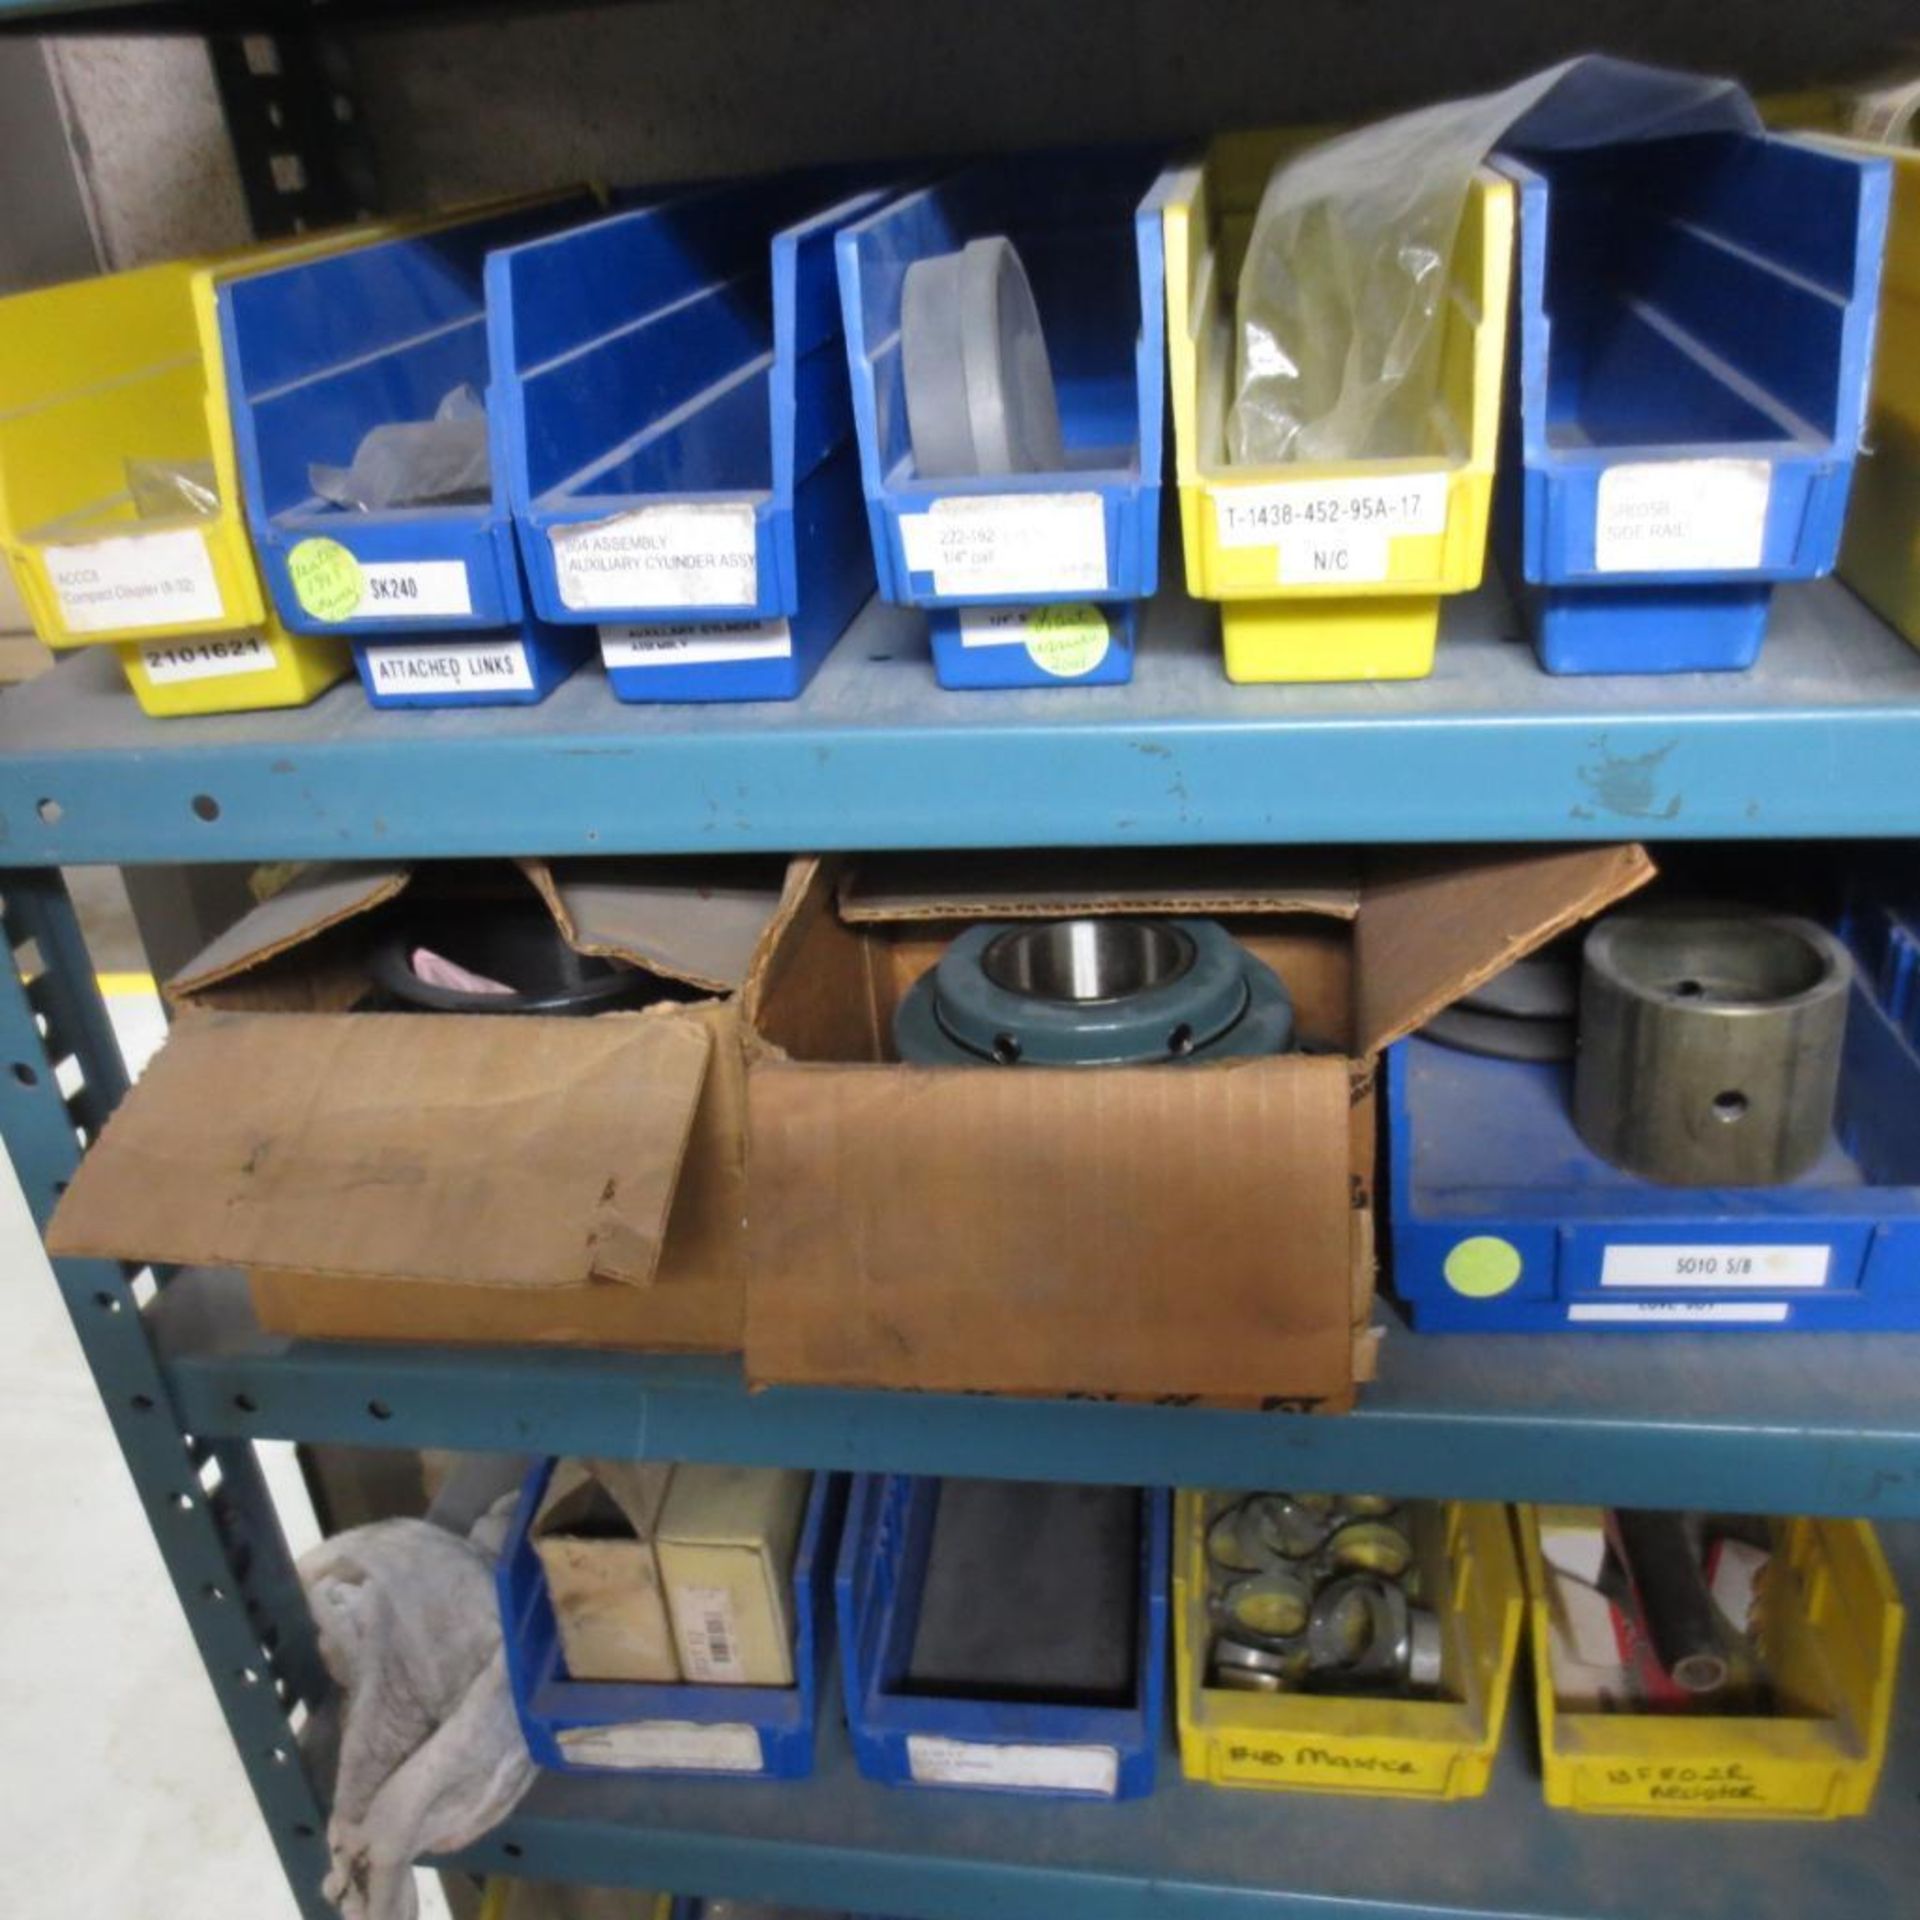 Parts Room Consisting of Gears, Electric Boards, Motors, AB Item, Filters, Motor Starters and Parts - Image 33 of 42